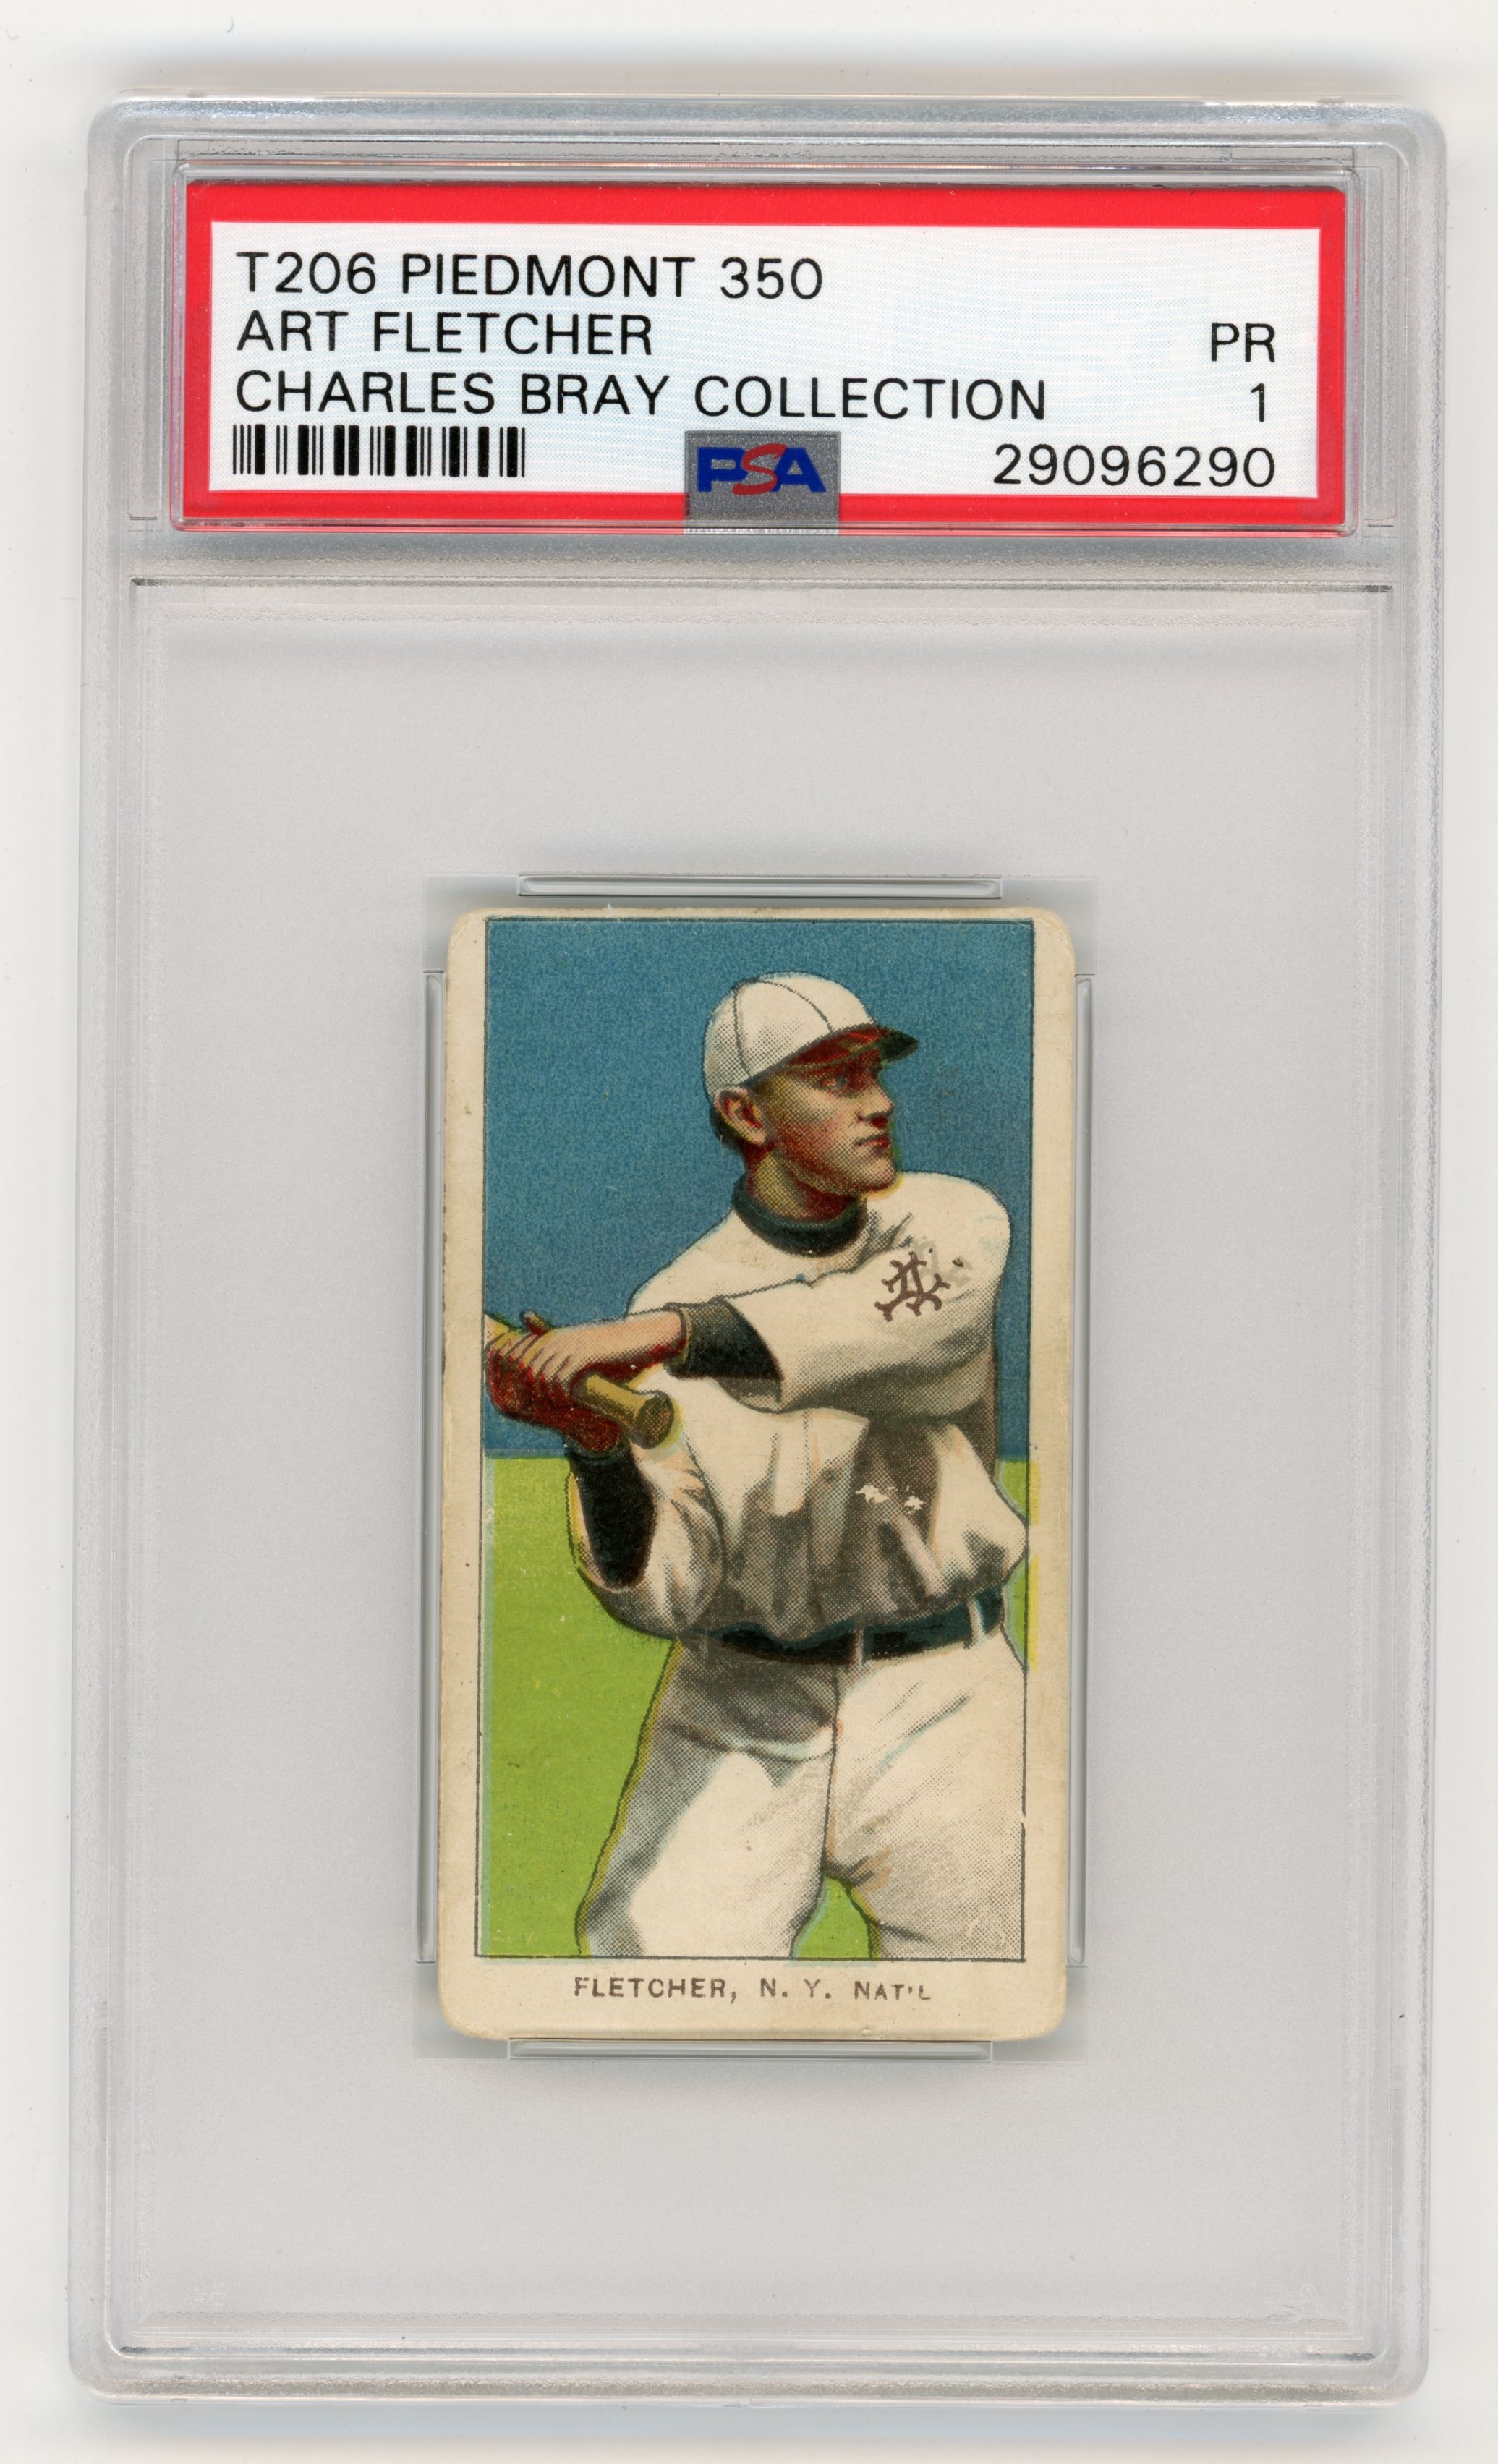 Baseball and Trading Cards - T206 Piedmont 350 Art Fletcher PSA PR 1 From the Charles Bray Collection.